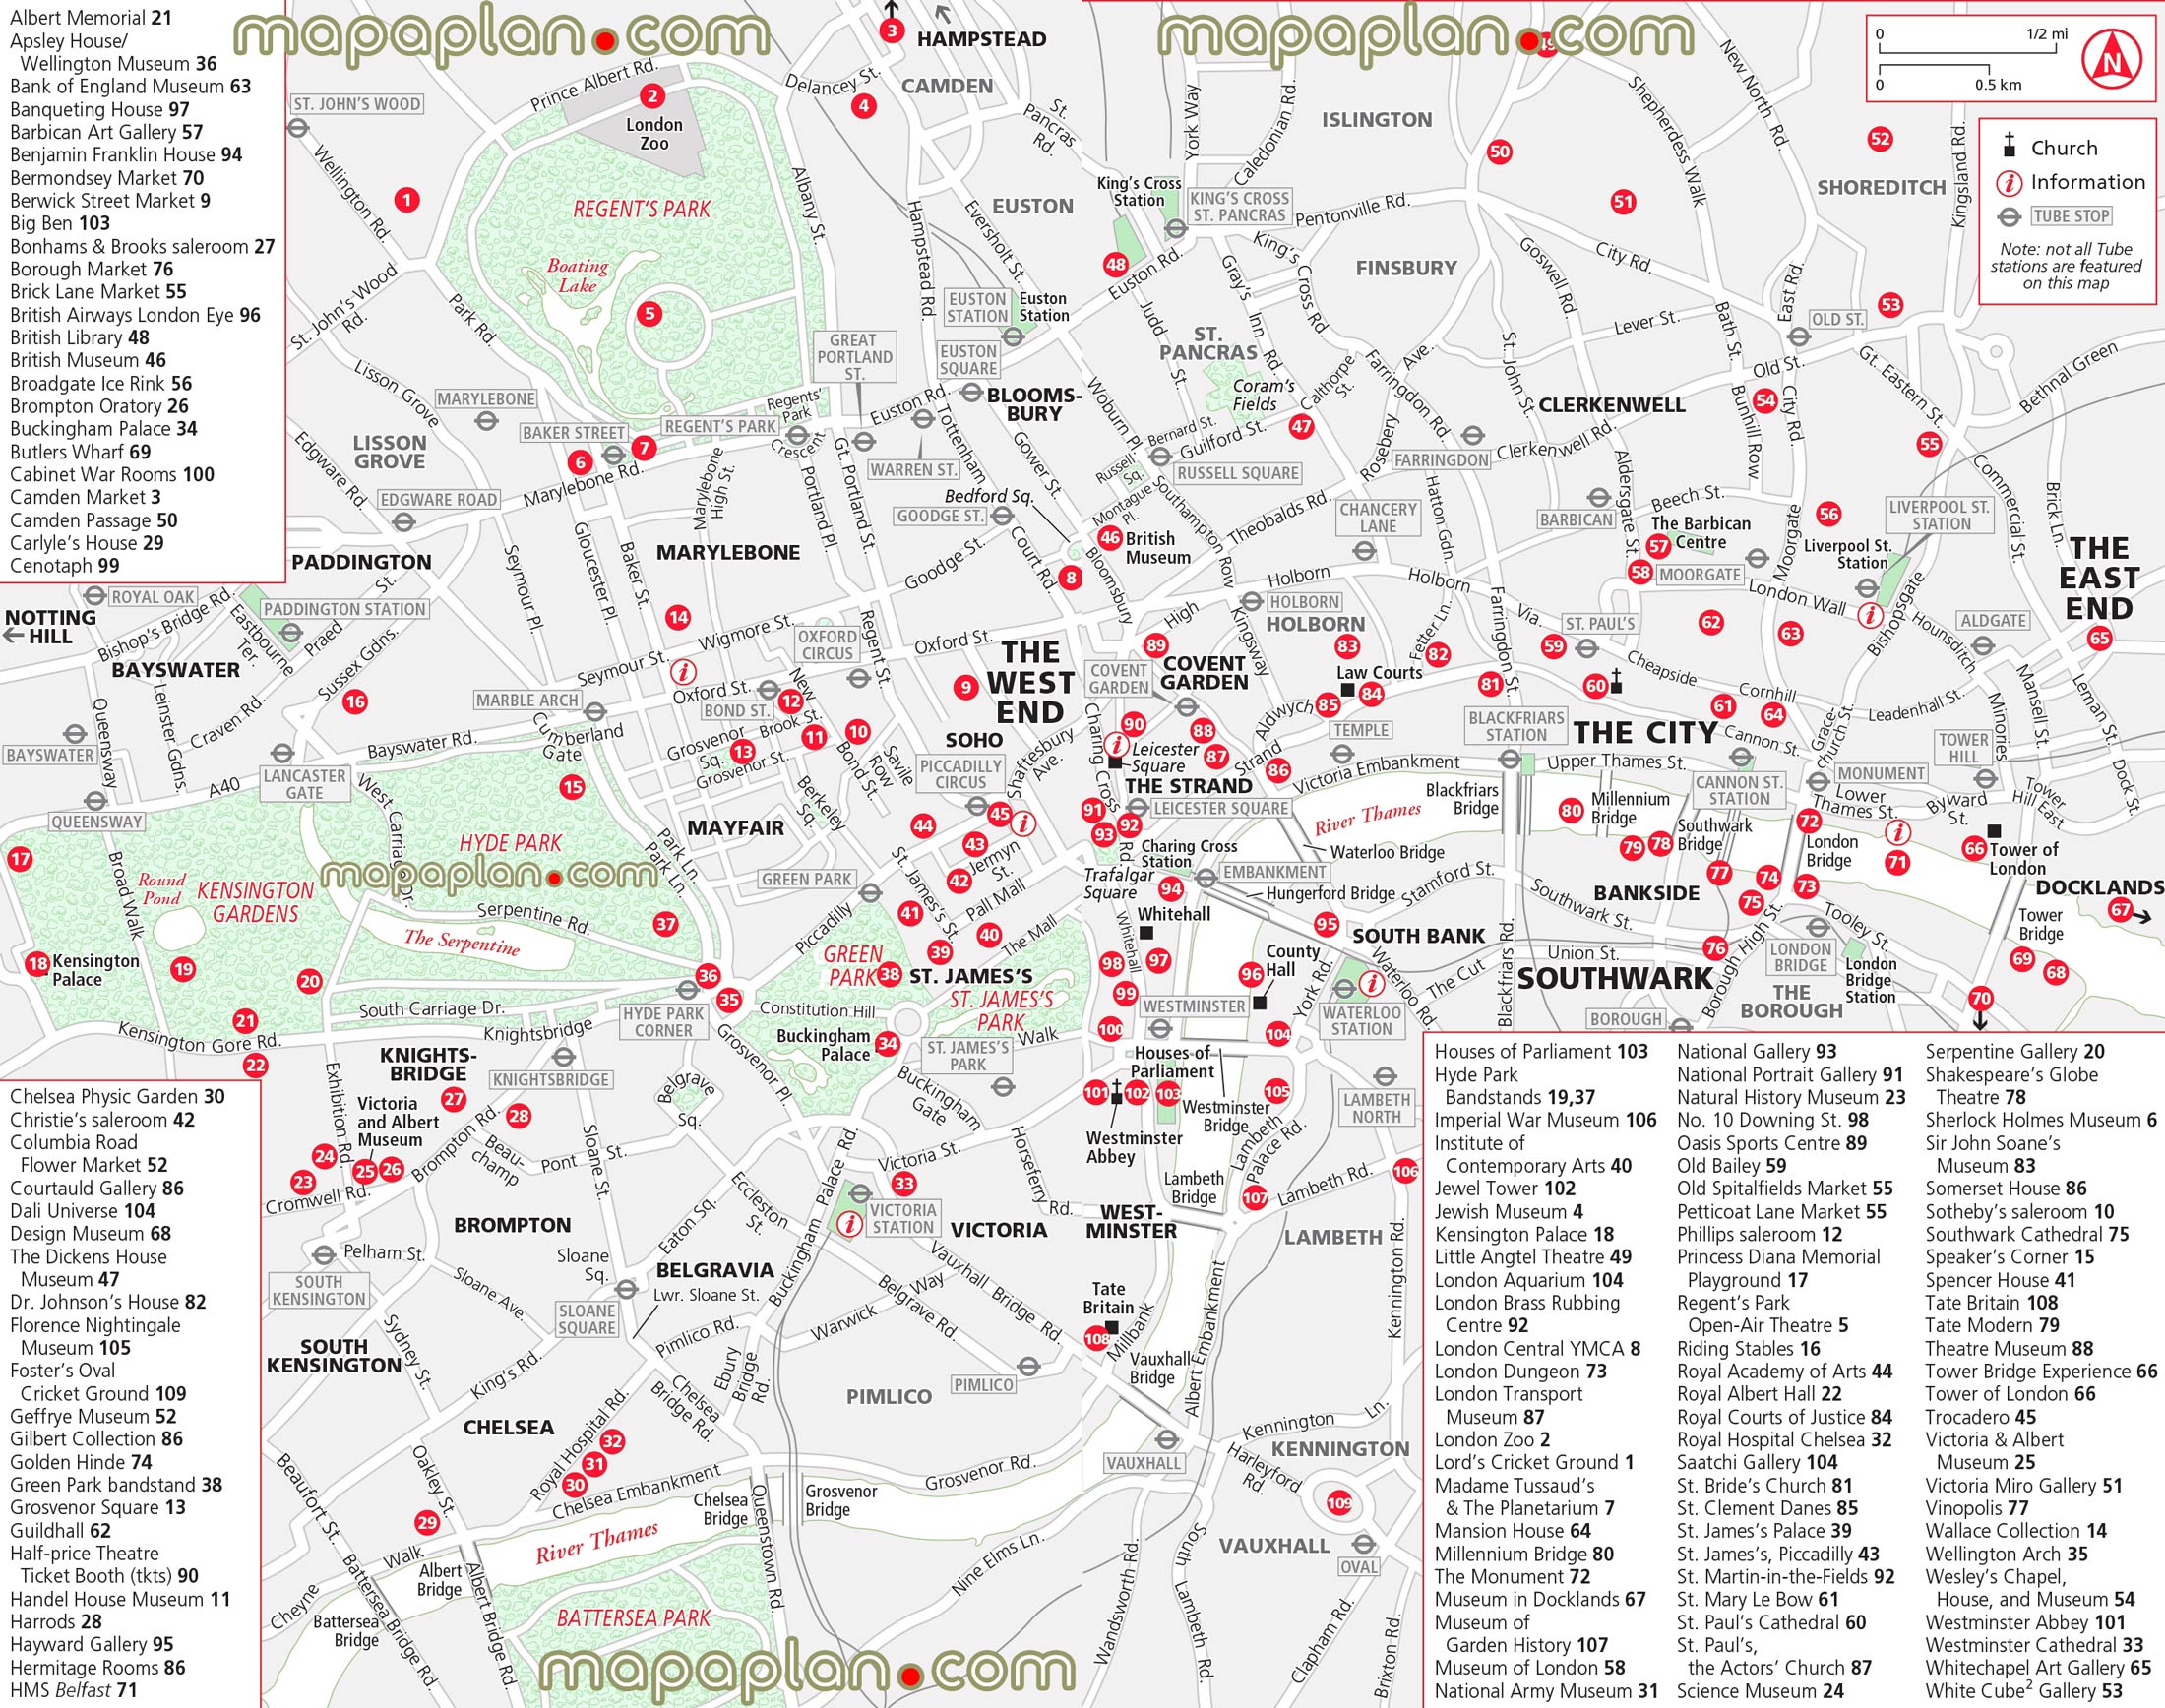 central london neighborhood district areas things do places free download interactive sightseeing downtown city covent gardens London Top tourist attractions map